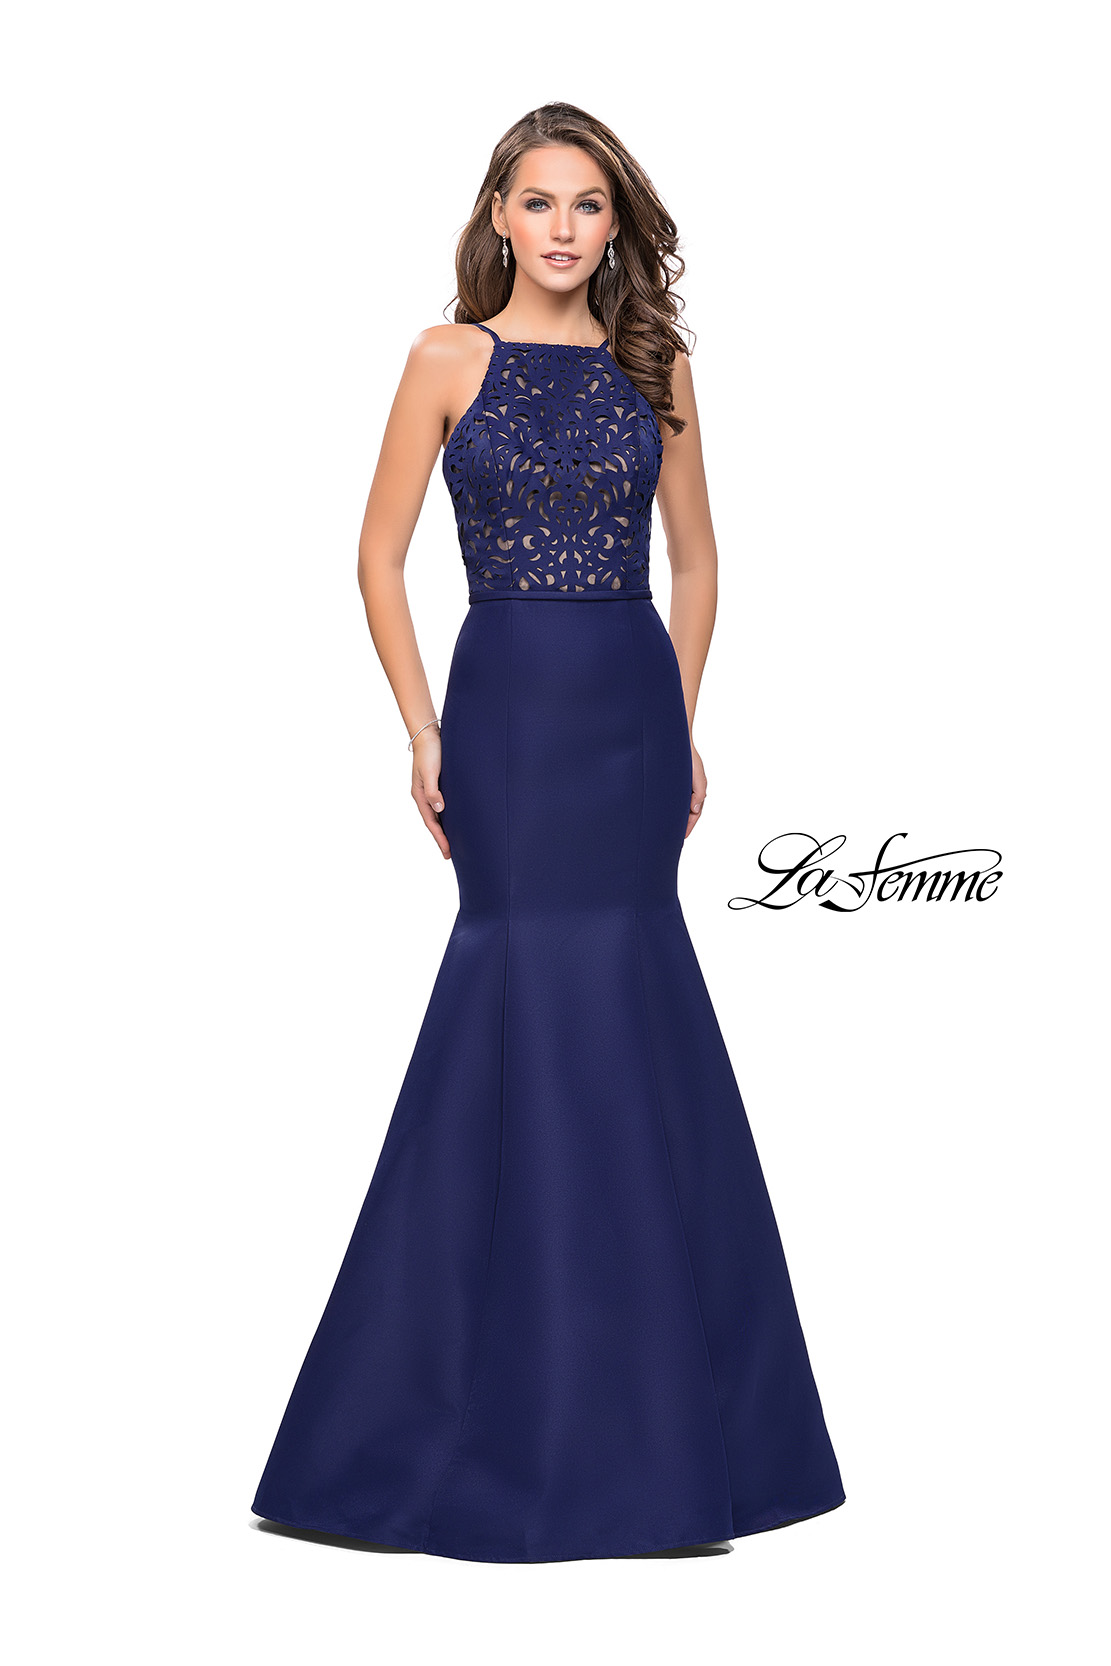 10 Free gown sewing Patterns and style Ideas. Make the dress of your dreams  for your … | Prom dress sewing patterns, Dress sewing patterns free, Gown  sewing pattern